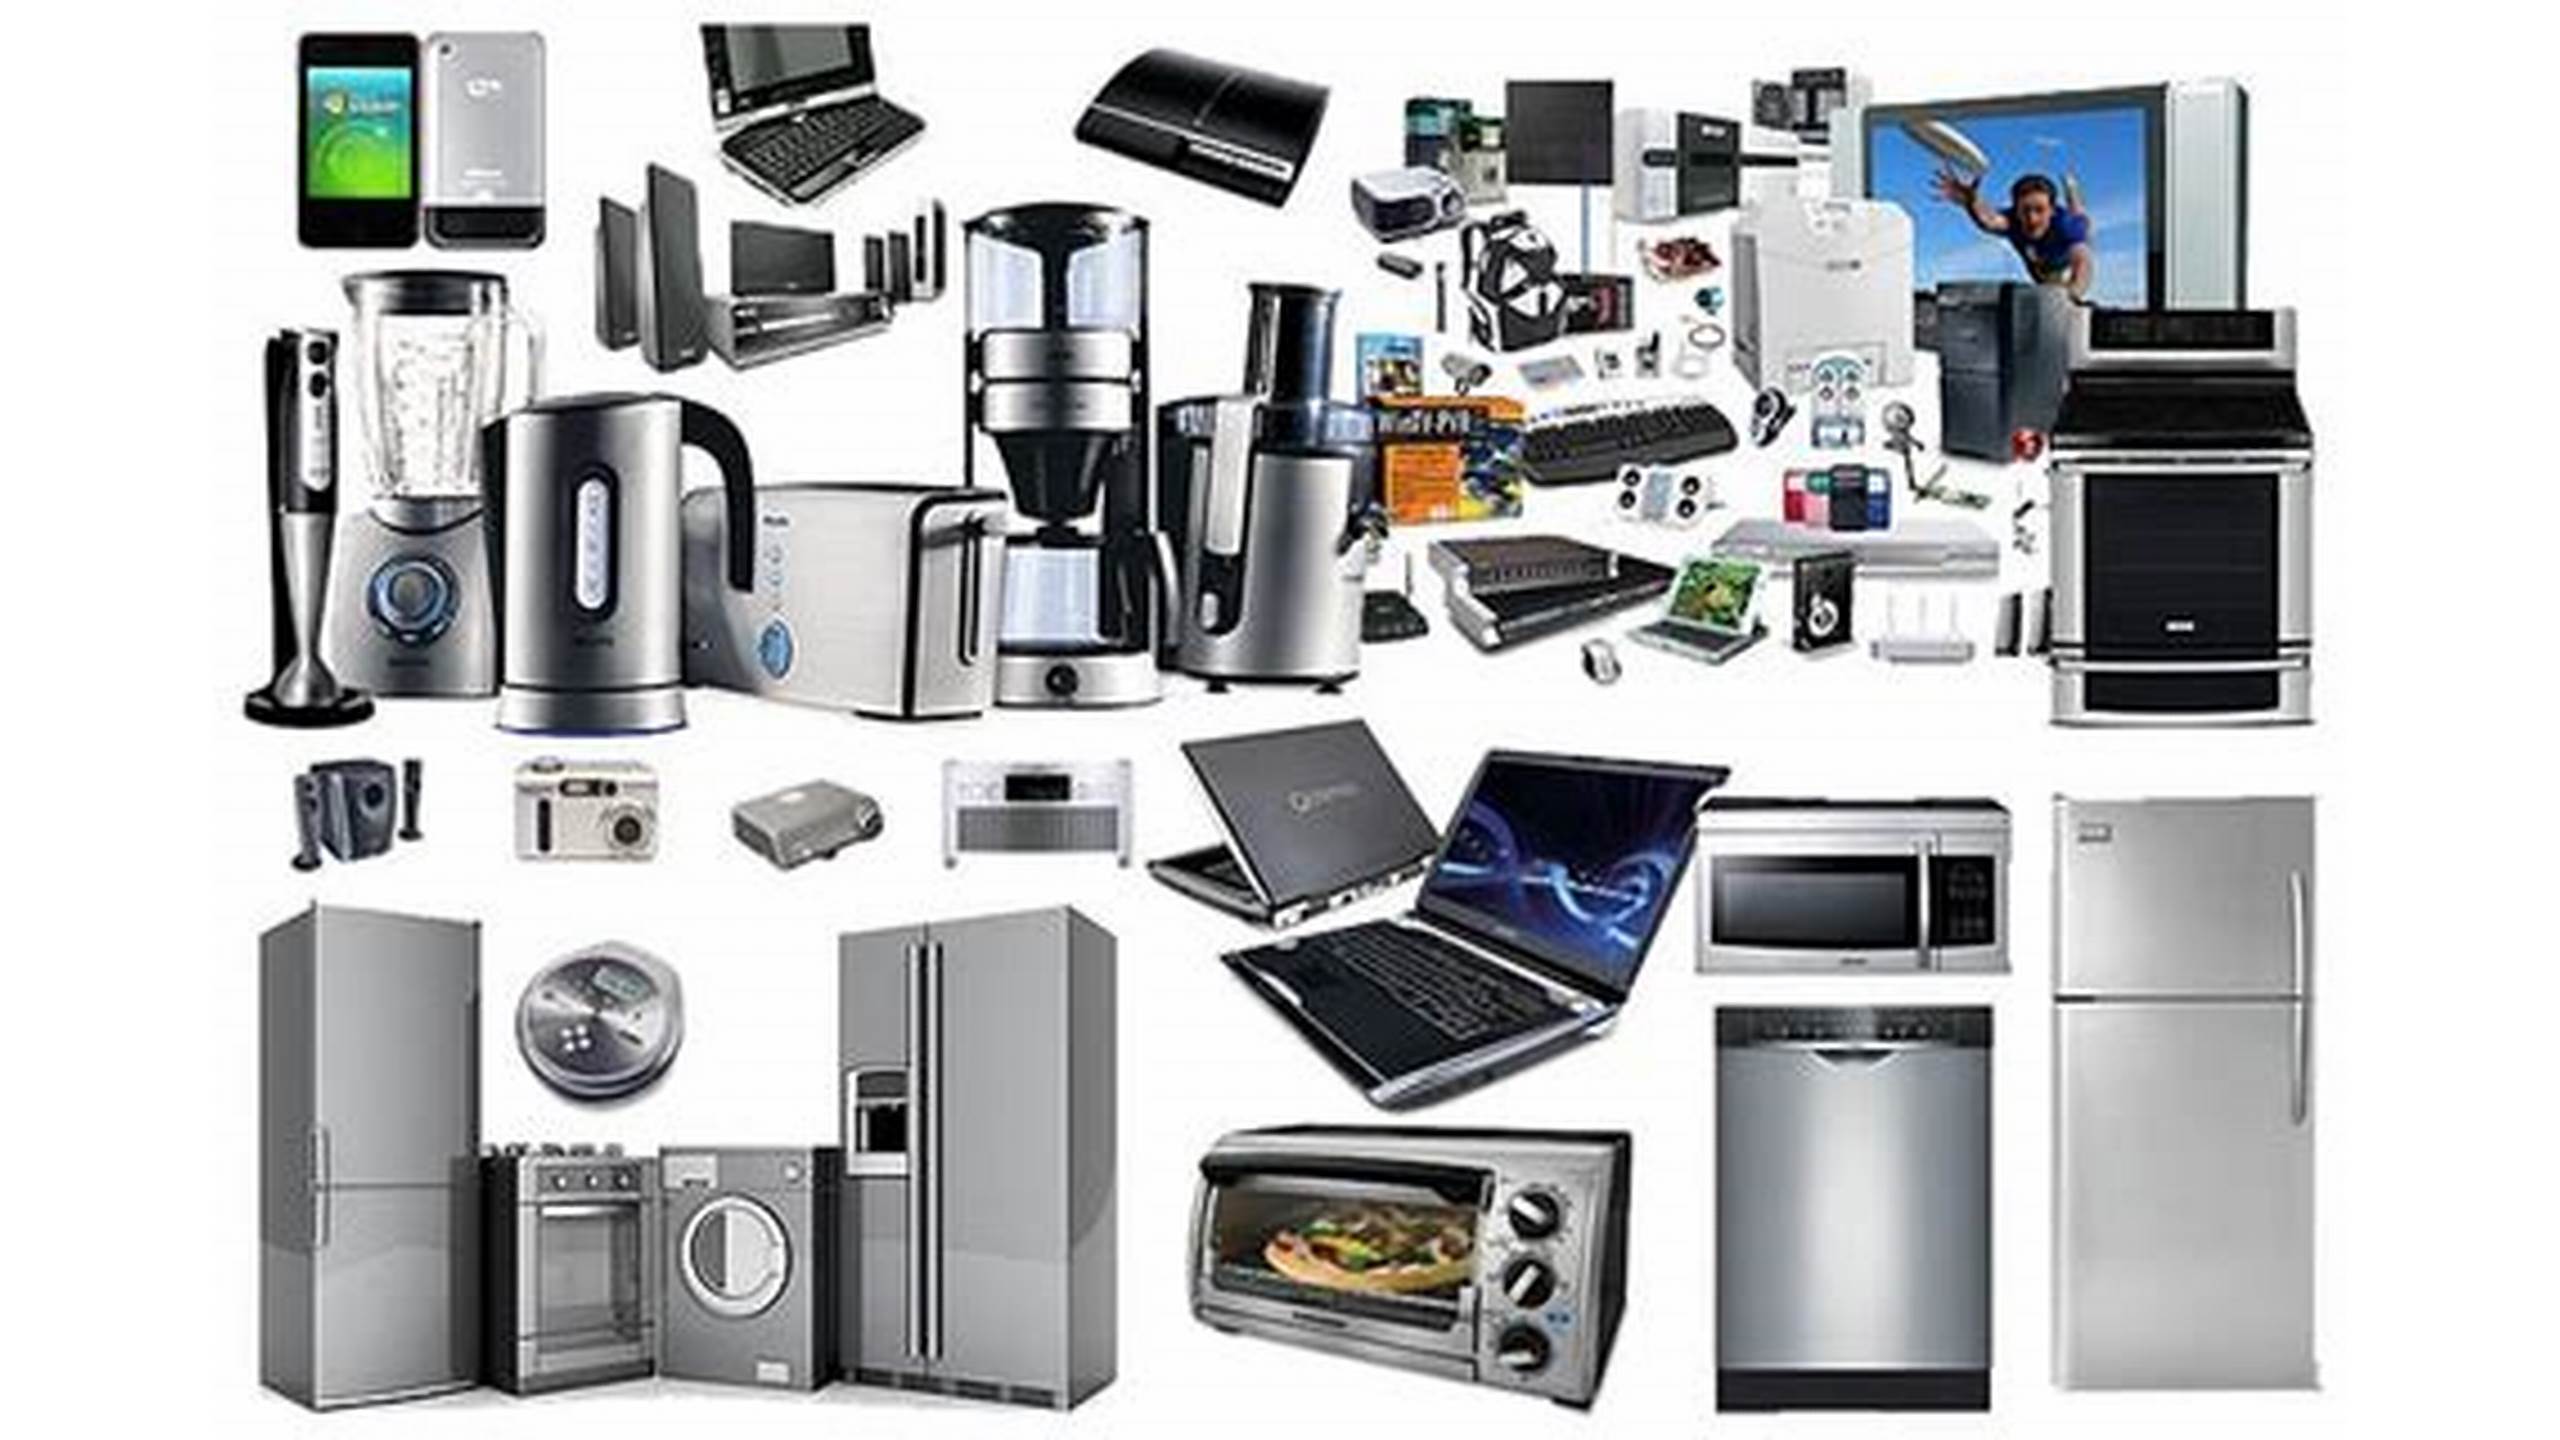 Consumer Goods and Appliances